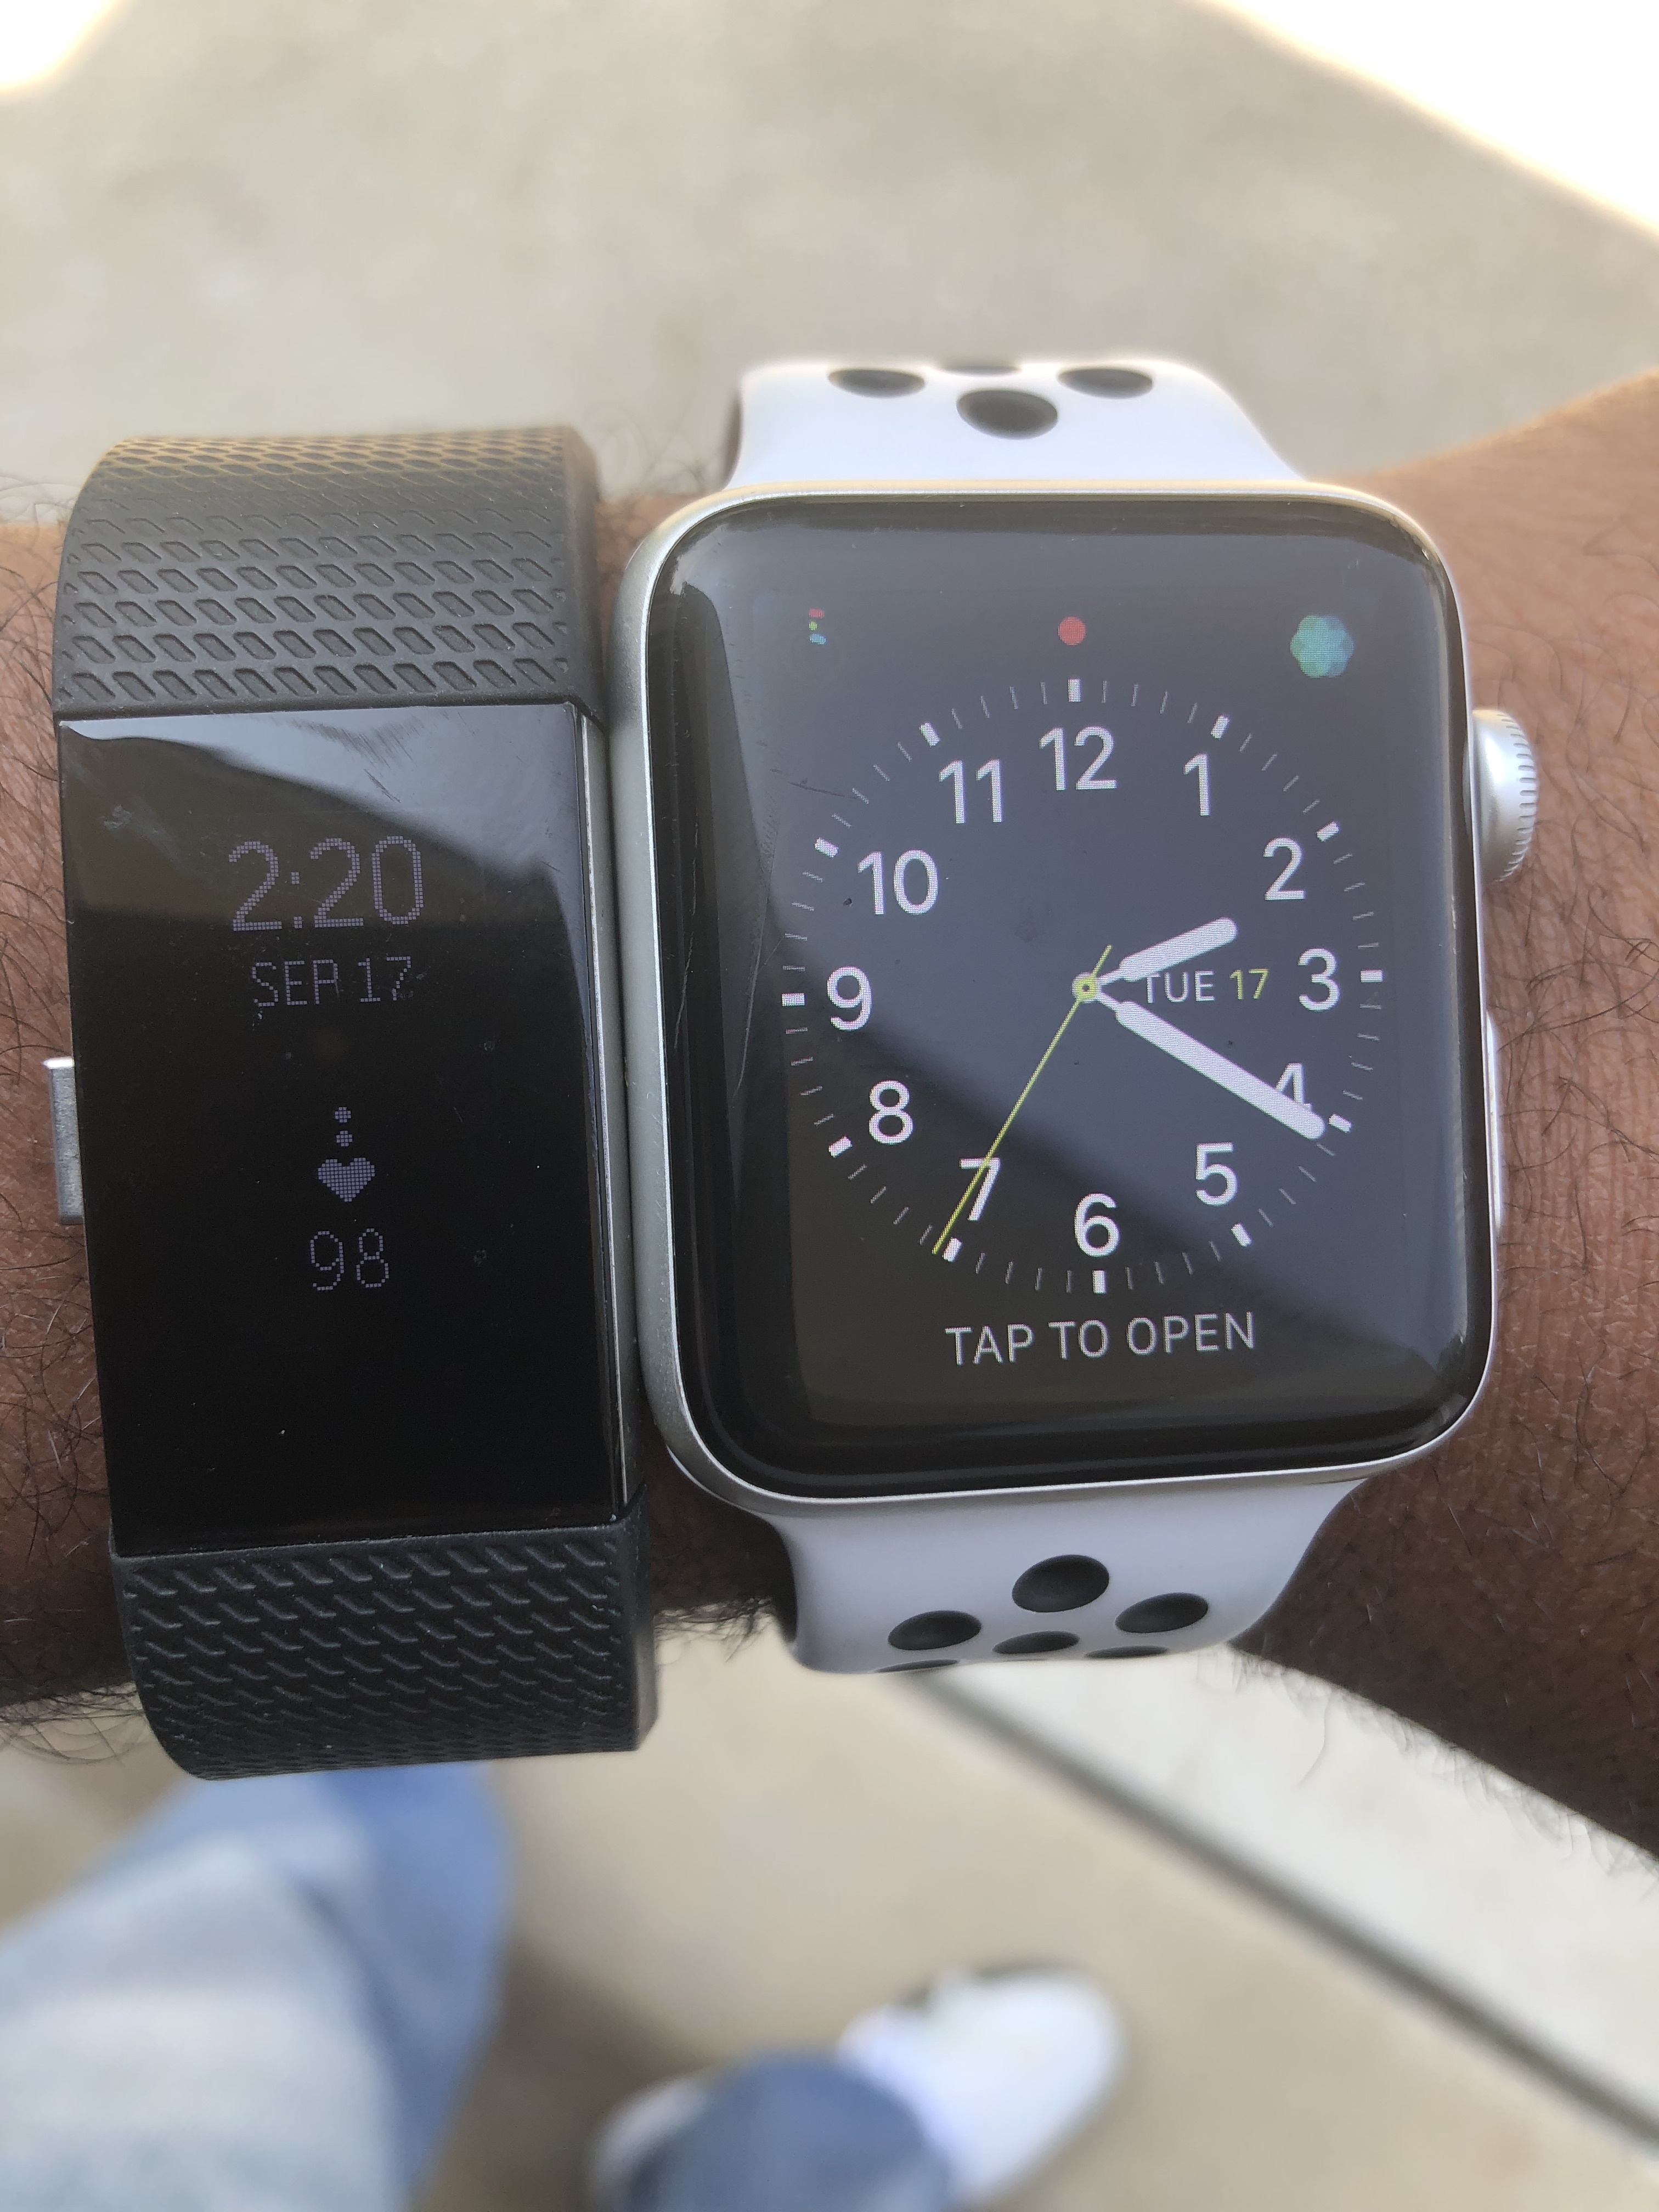 does apple watch have challenges like fitbit